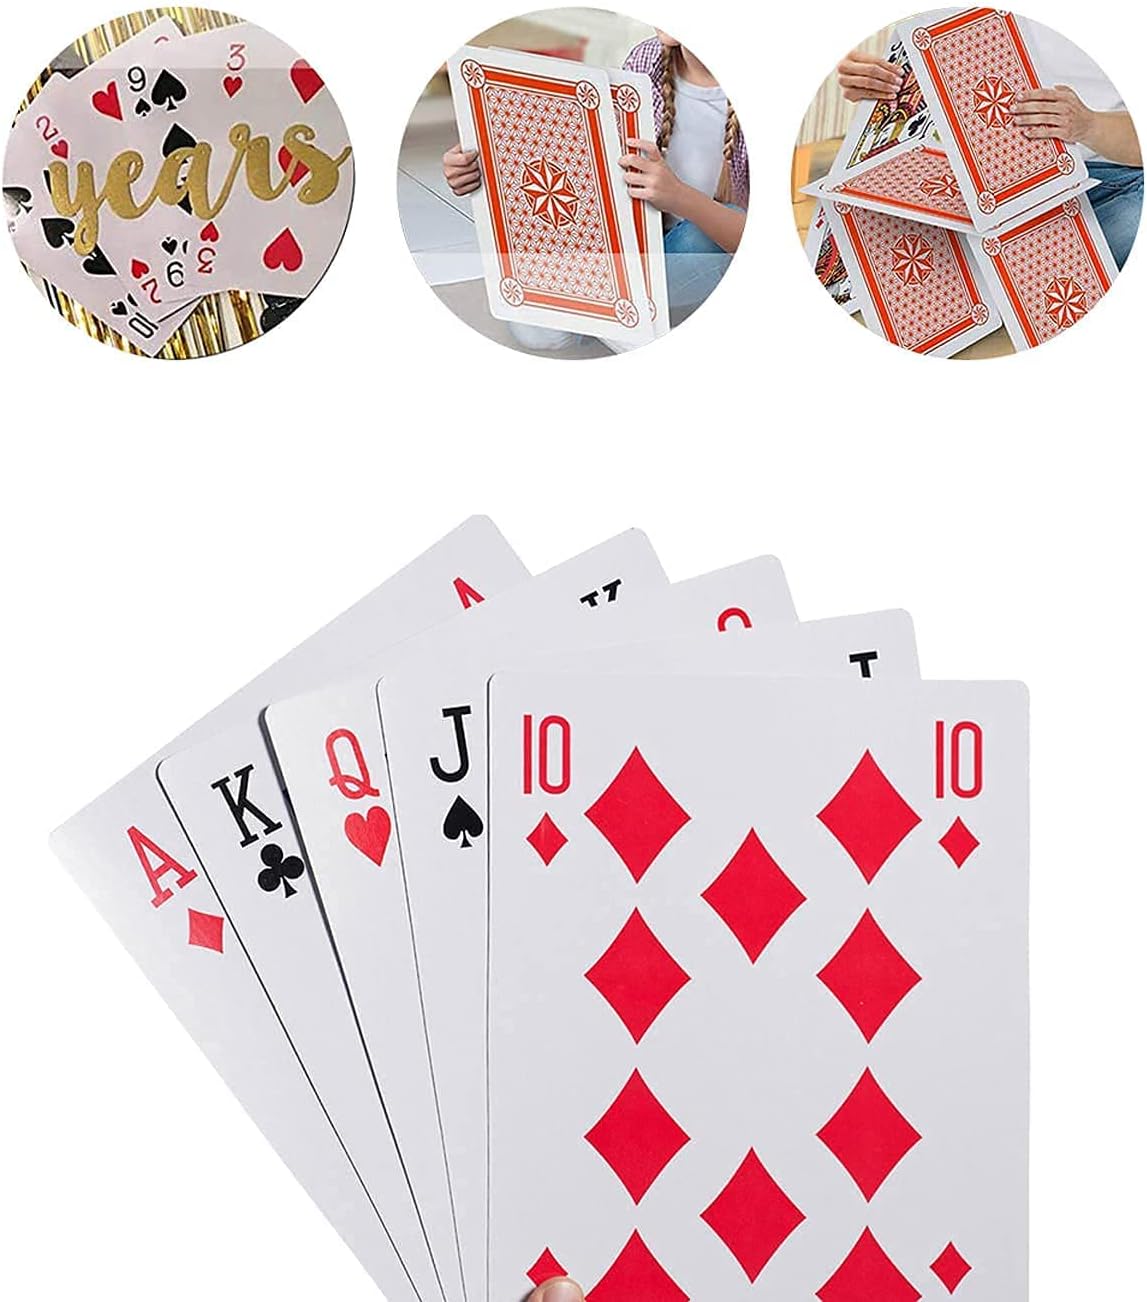 Giant playing cards deck